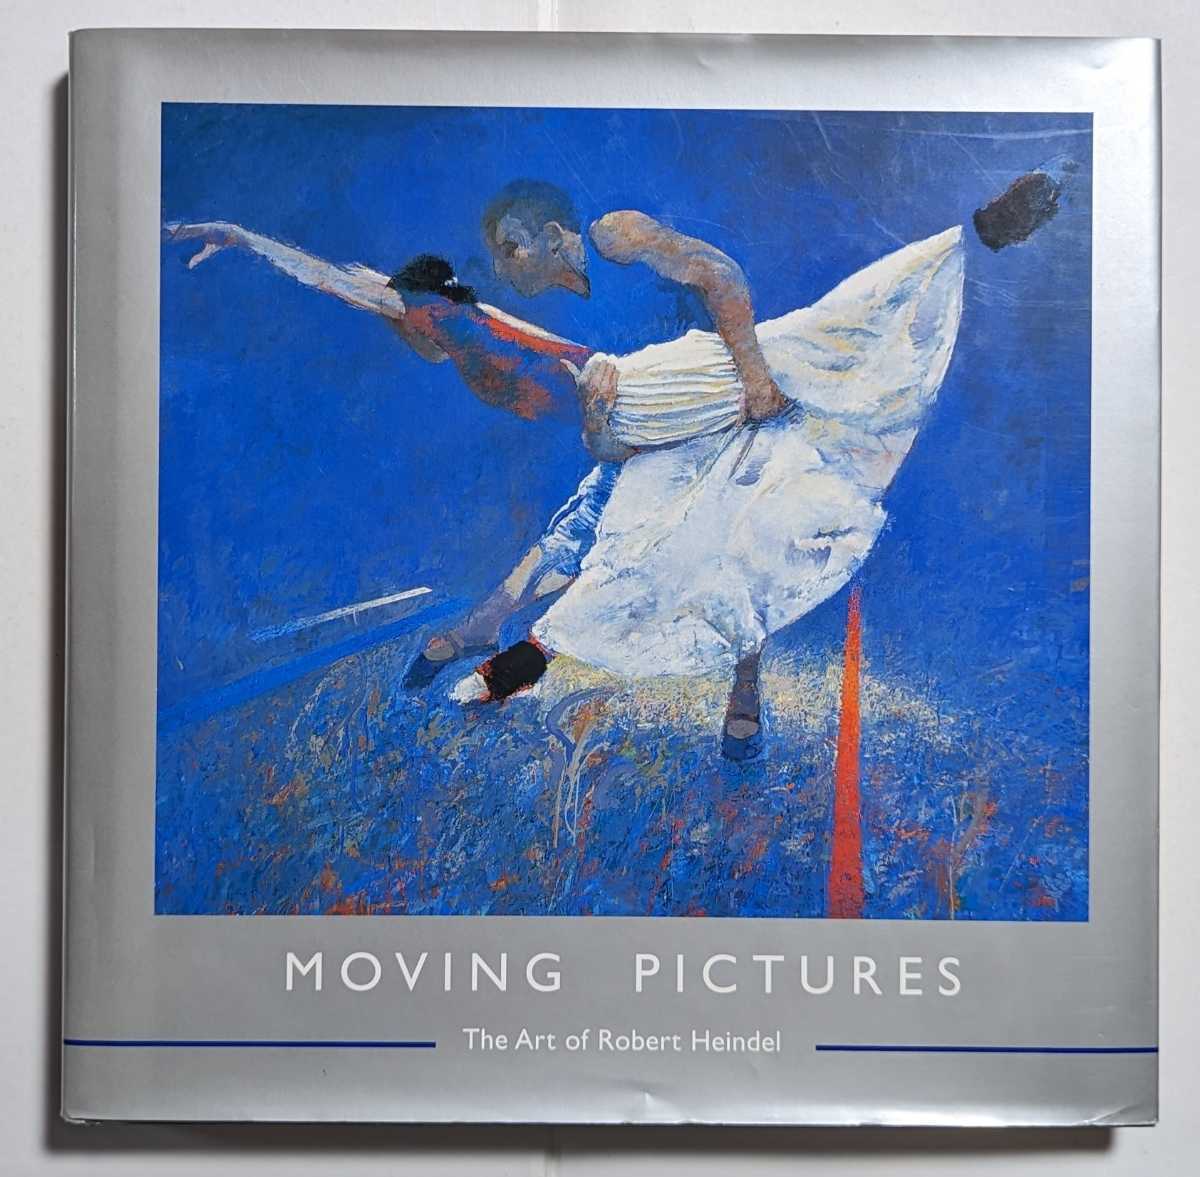 MOVING PICTURES The Art of Robert Heindelロバート・ハインデル